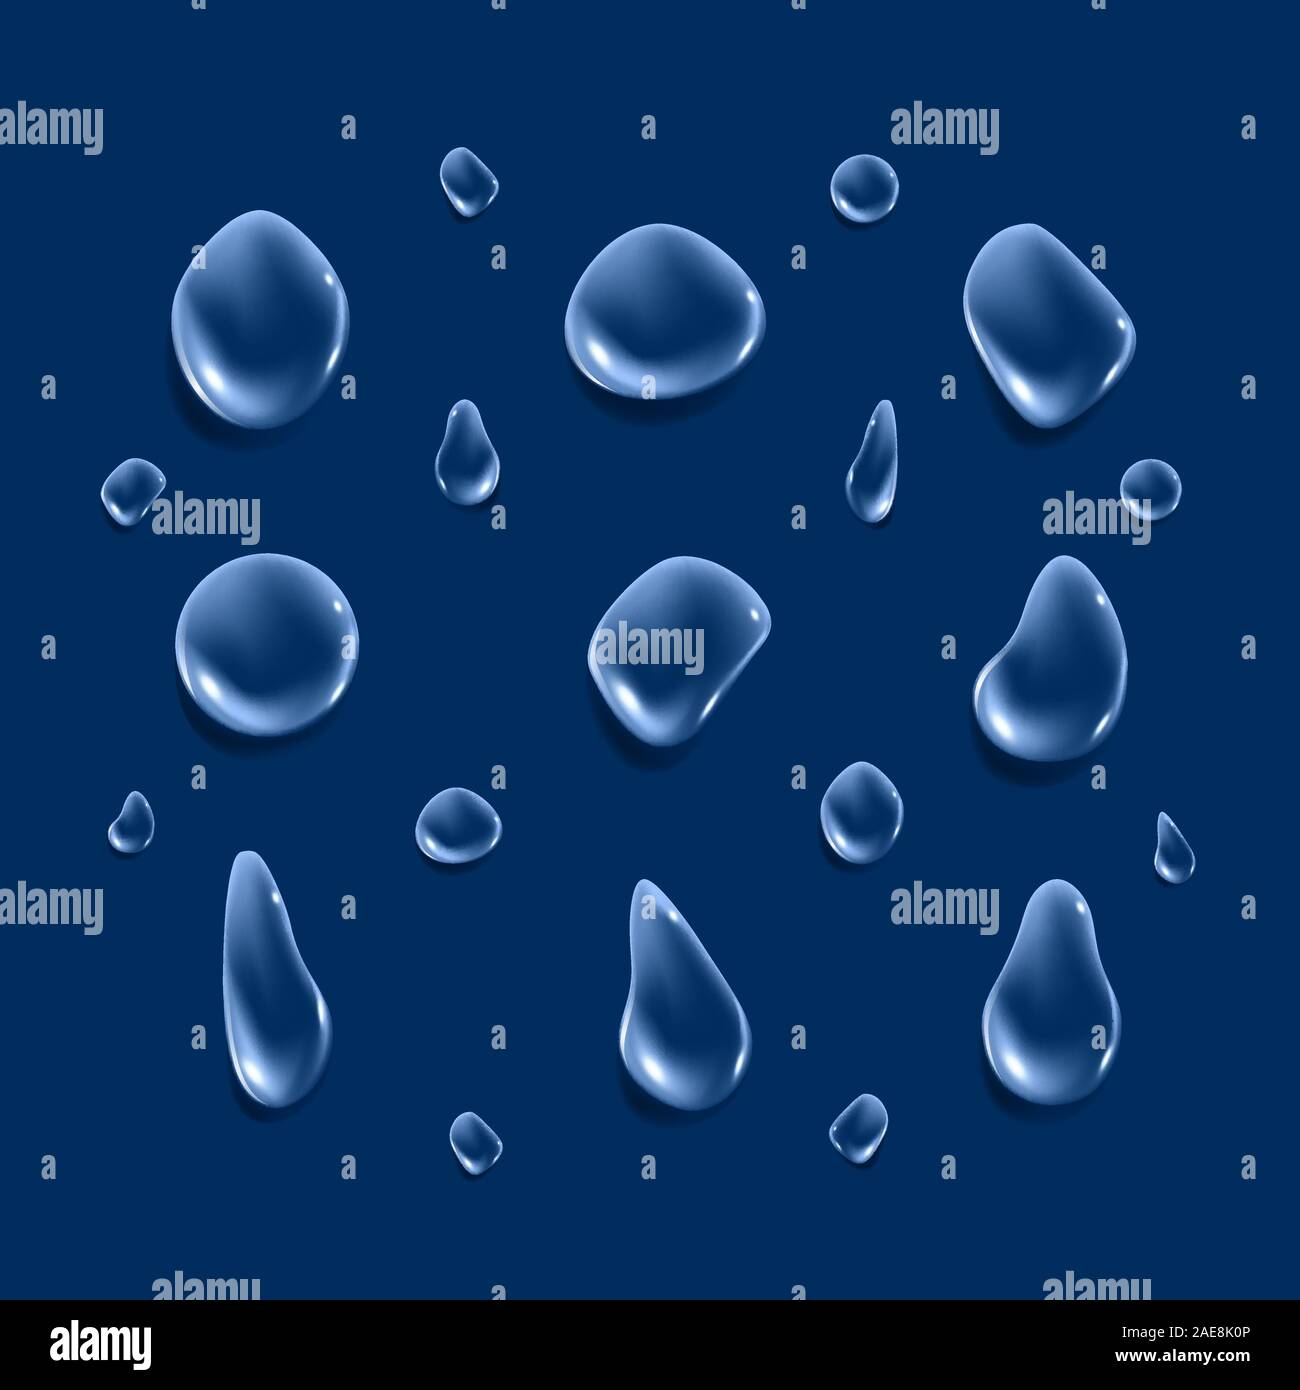 Set of Drops. Liquid clear droplet. Dew on glass surface. vector illustration on blue background Stock Vector